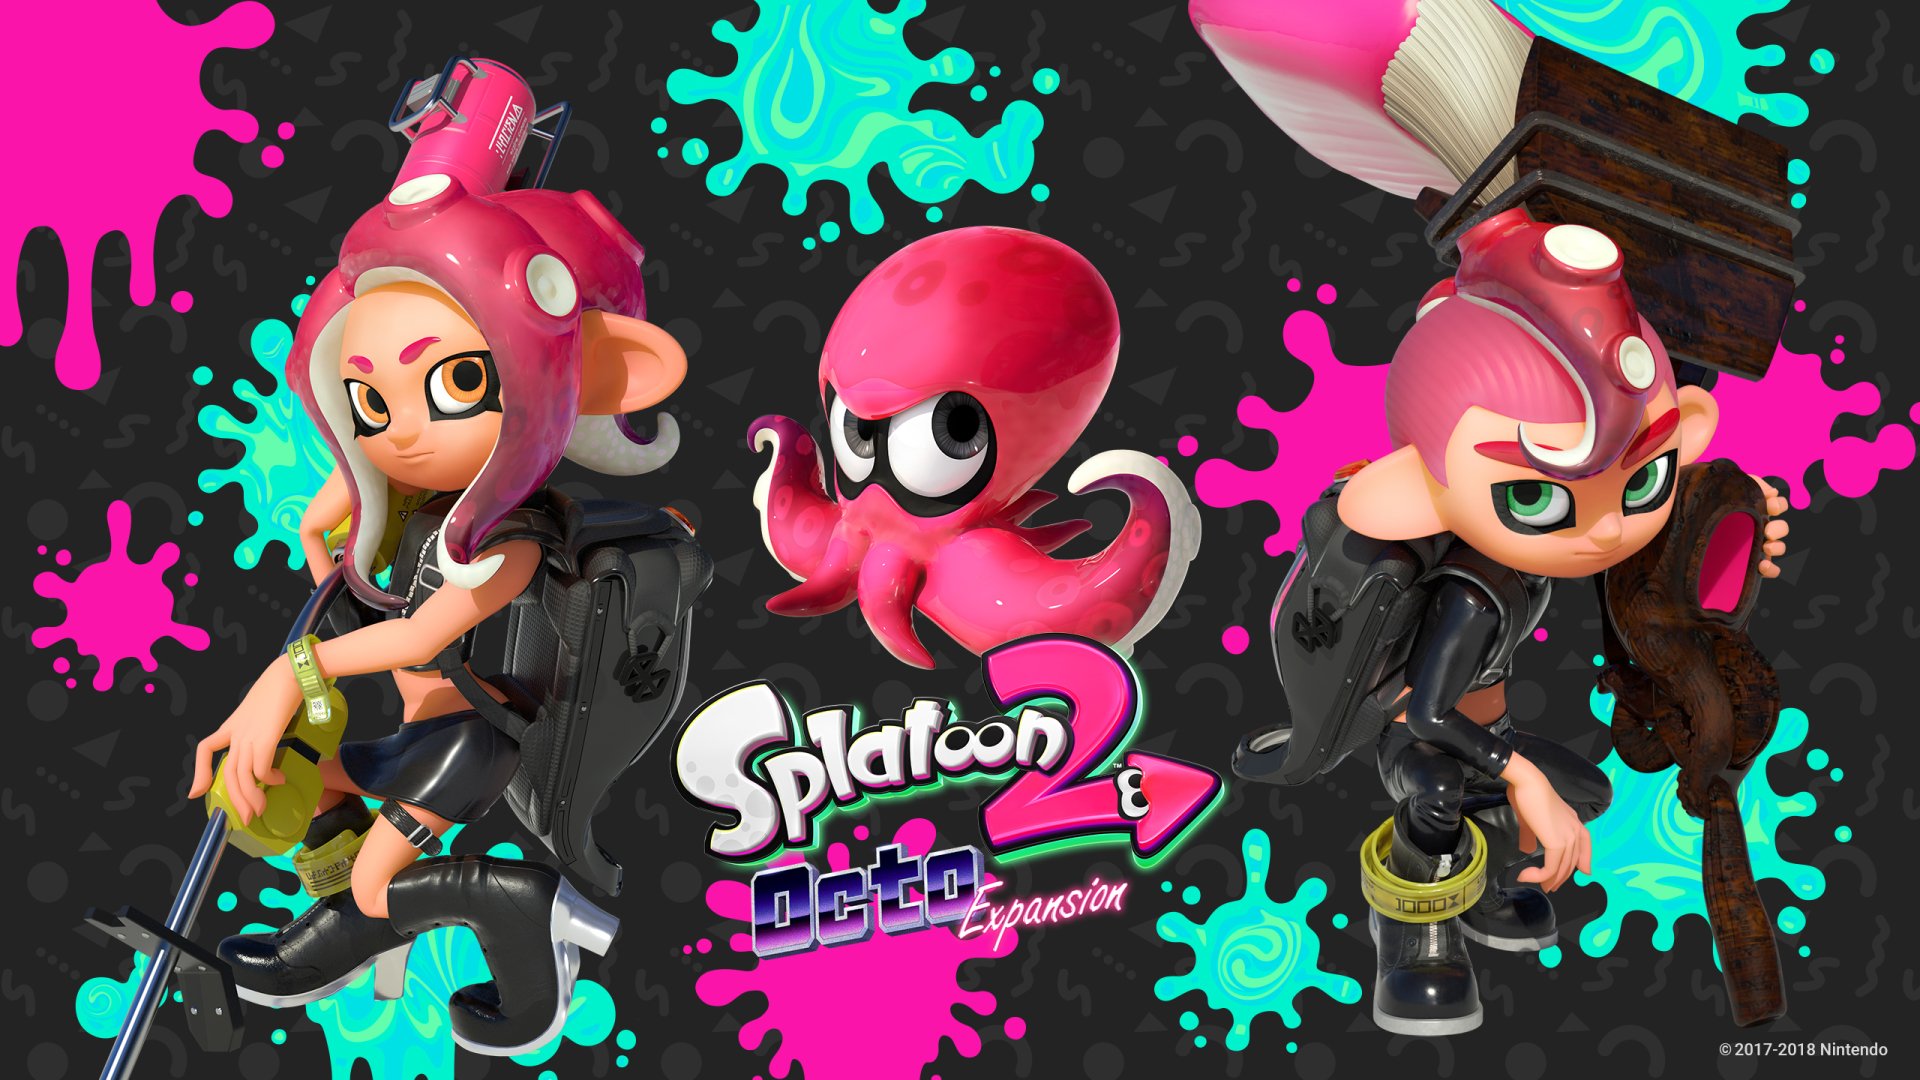 Splatoon Octo Expansion HD Wallpaper Background Image